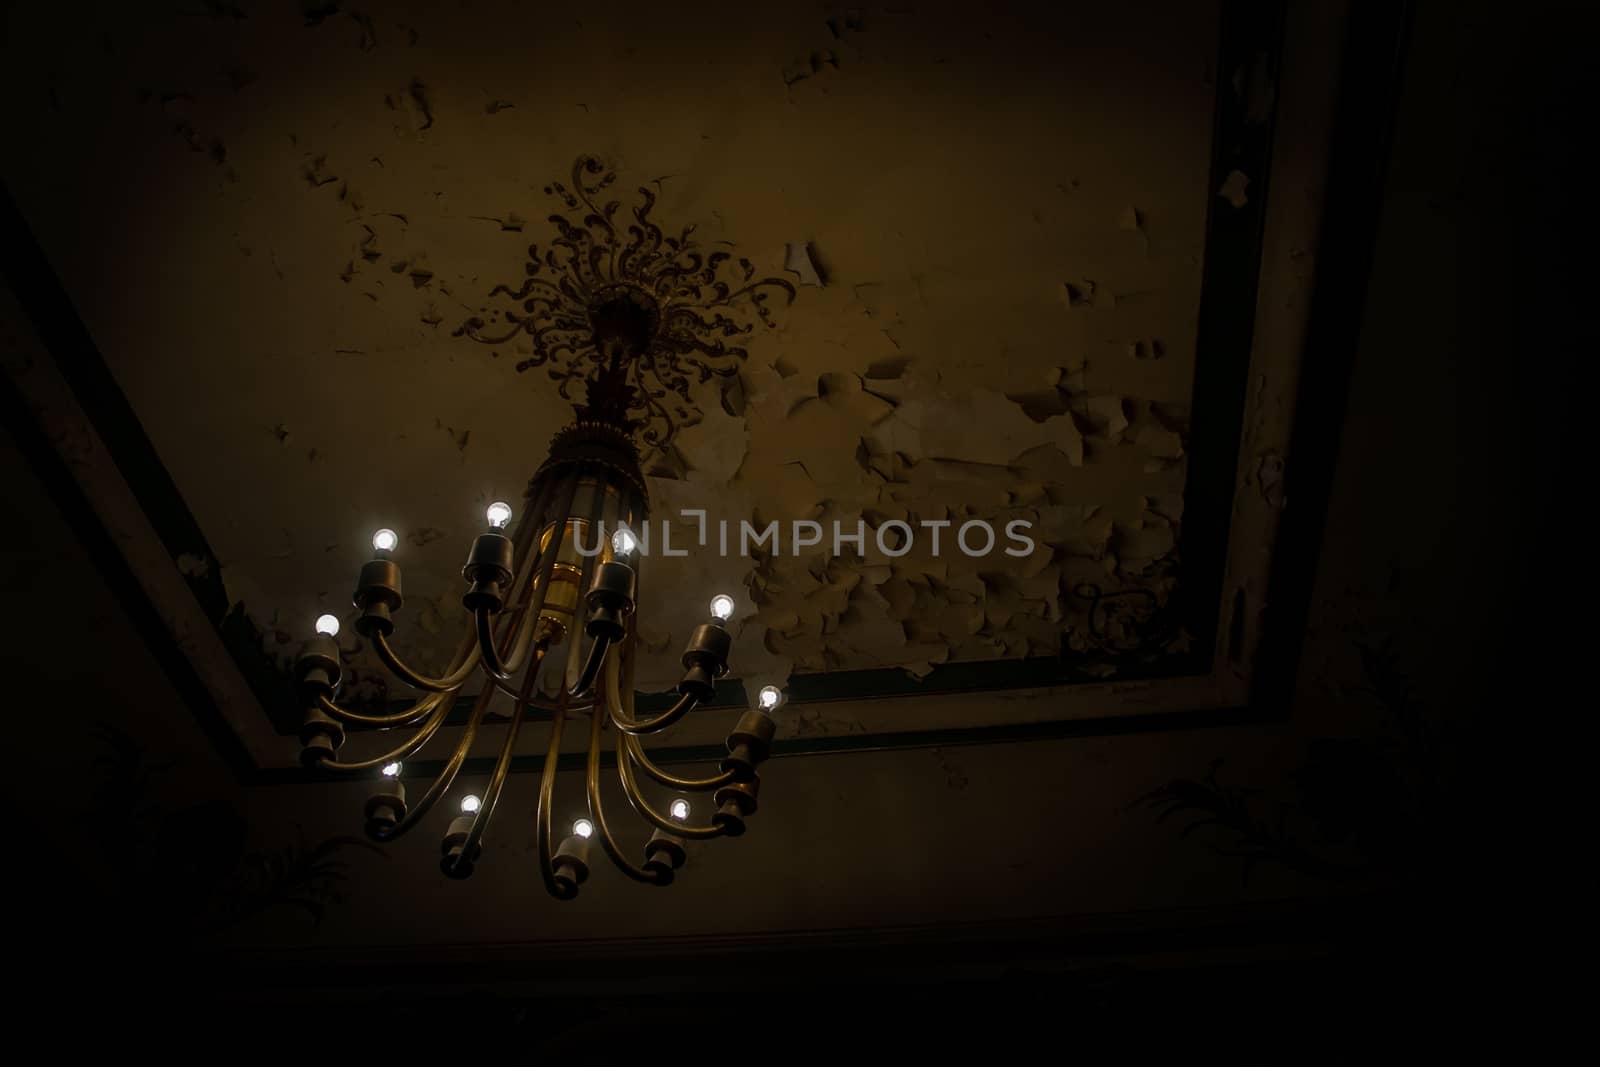 Interior scene of a chandelier in a grungy and dark concrete wasted room.